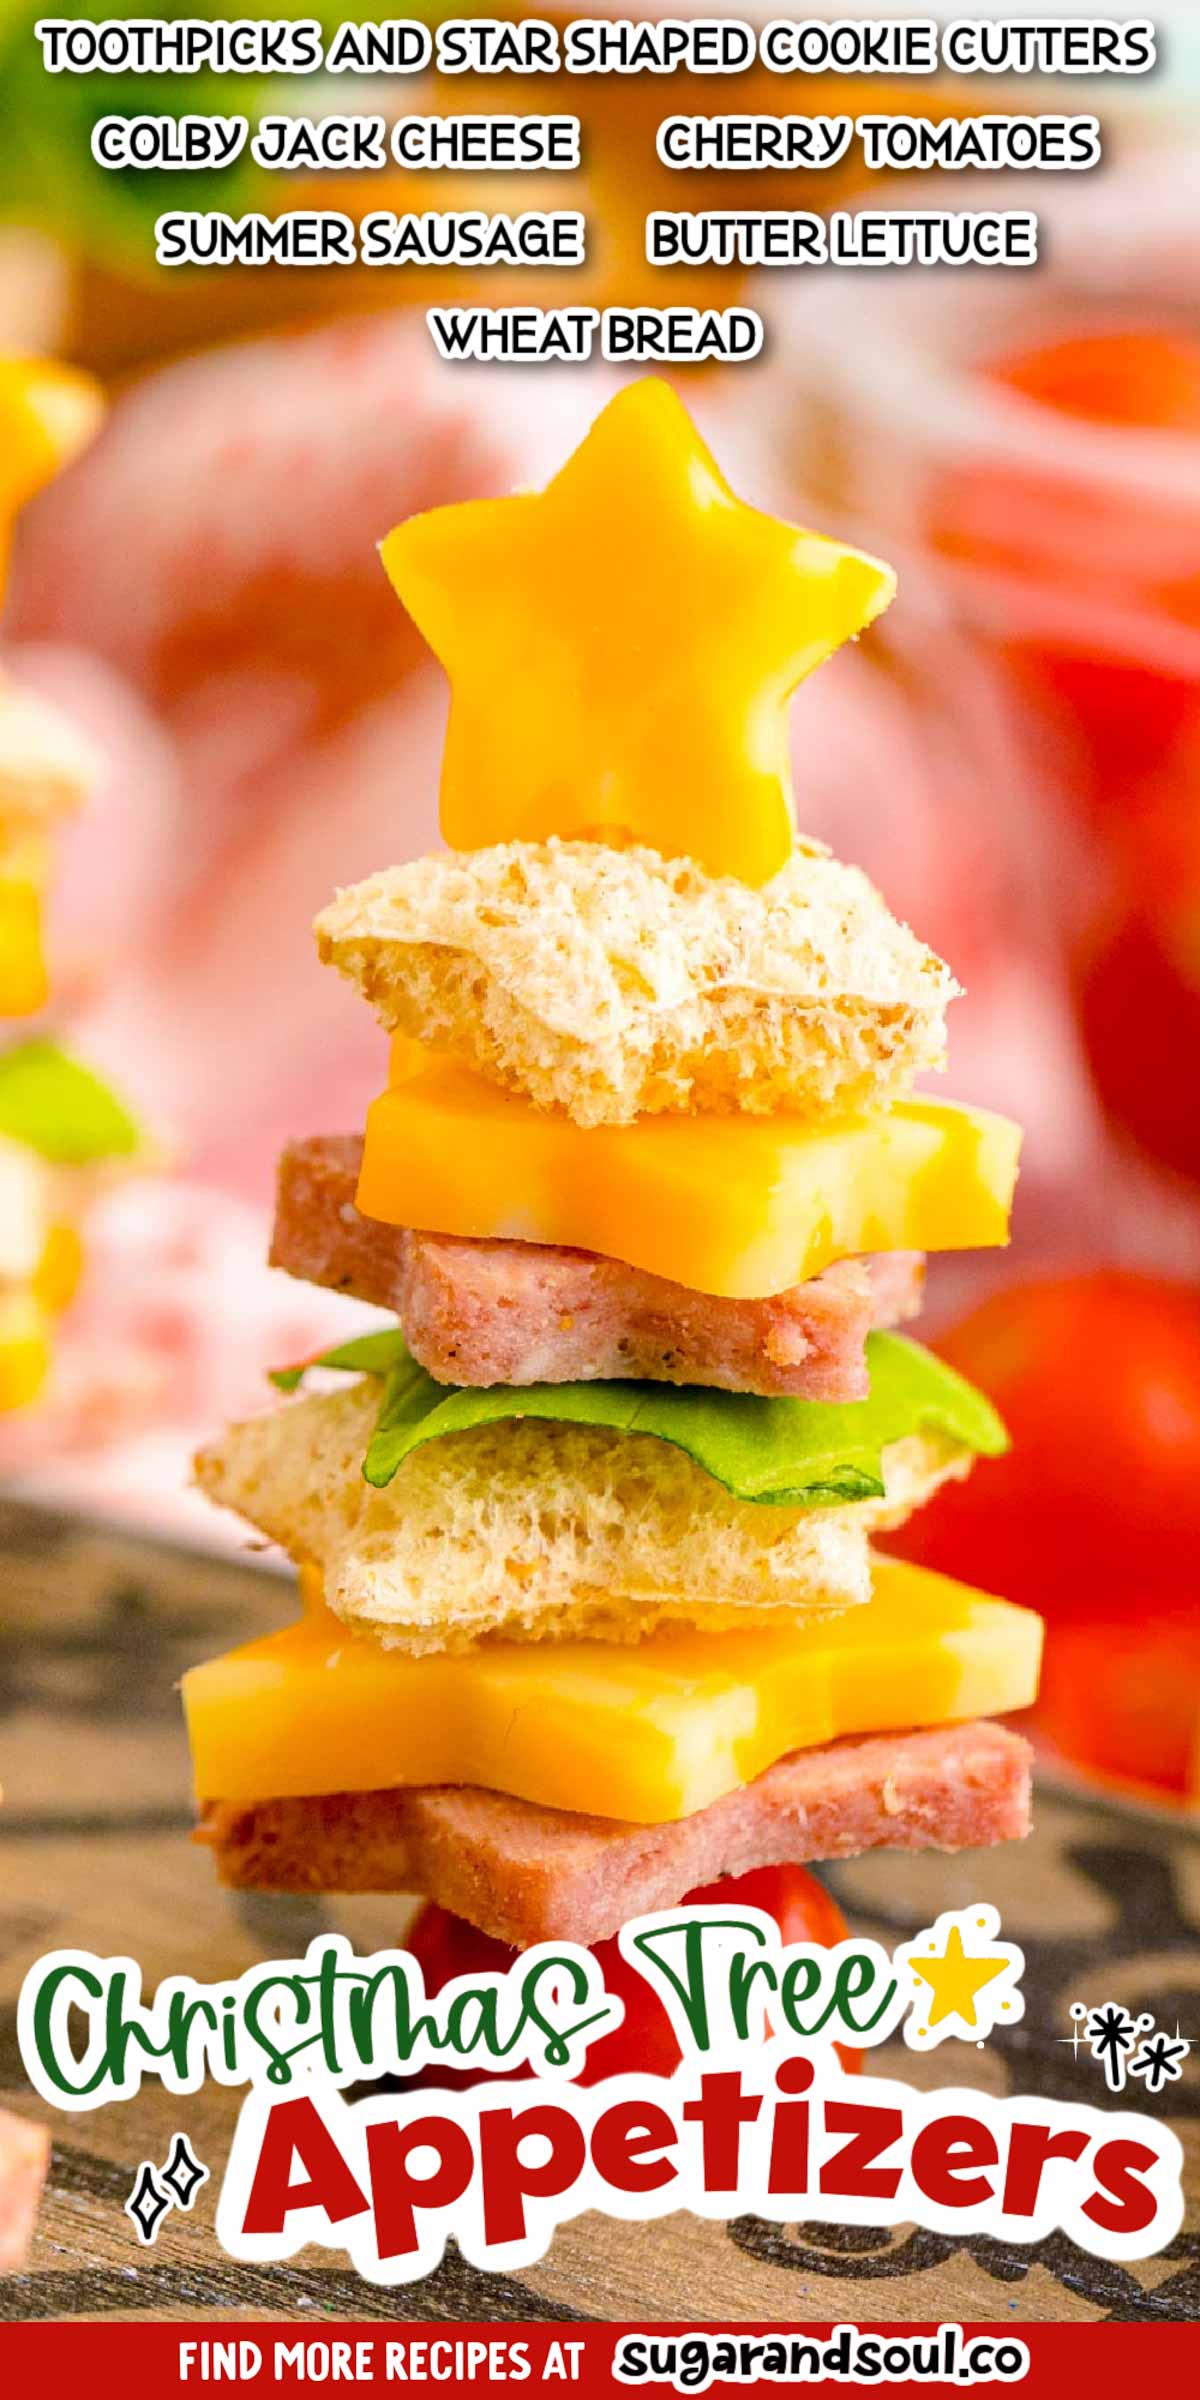 Easy Christmas Appetizer cuts sandwich ingredients into stars and then stacks them onto toothpicks to create a festive Christmas tree shape! Prep this holiday party appetizer in just 30 minutes! via @sugarandsoulco